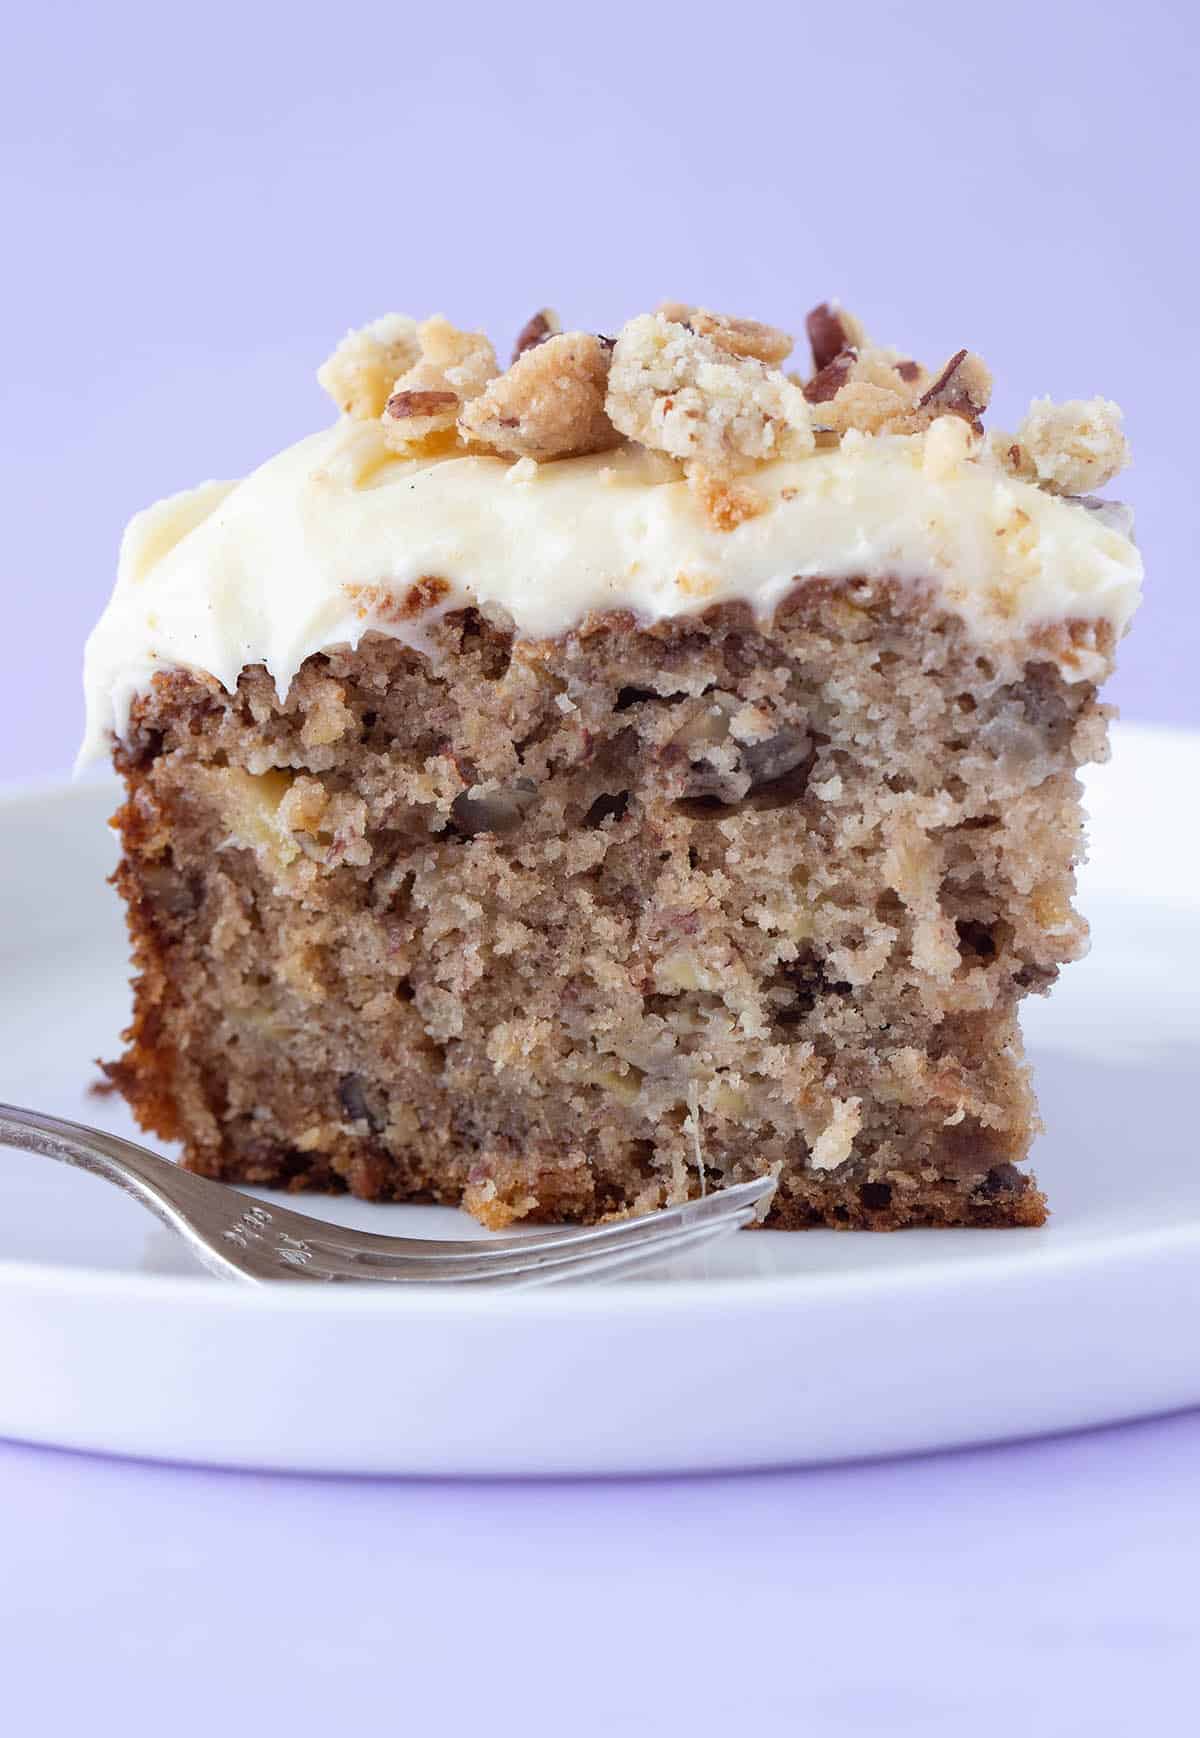 A big slice of Hummingbird Cake on a white plate with a cake fork.